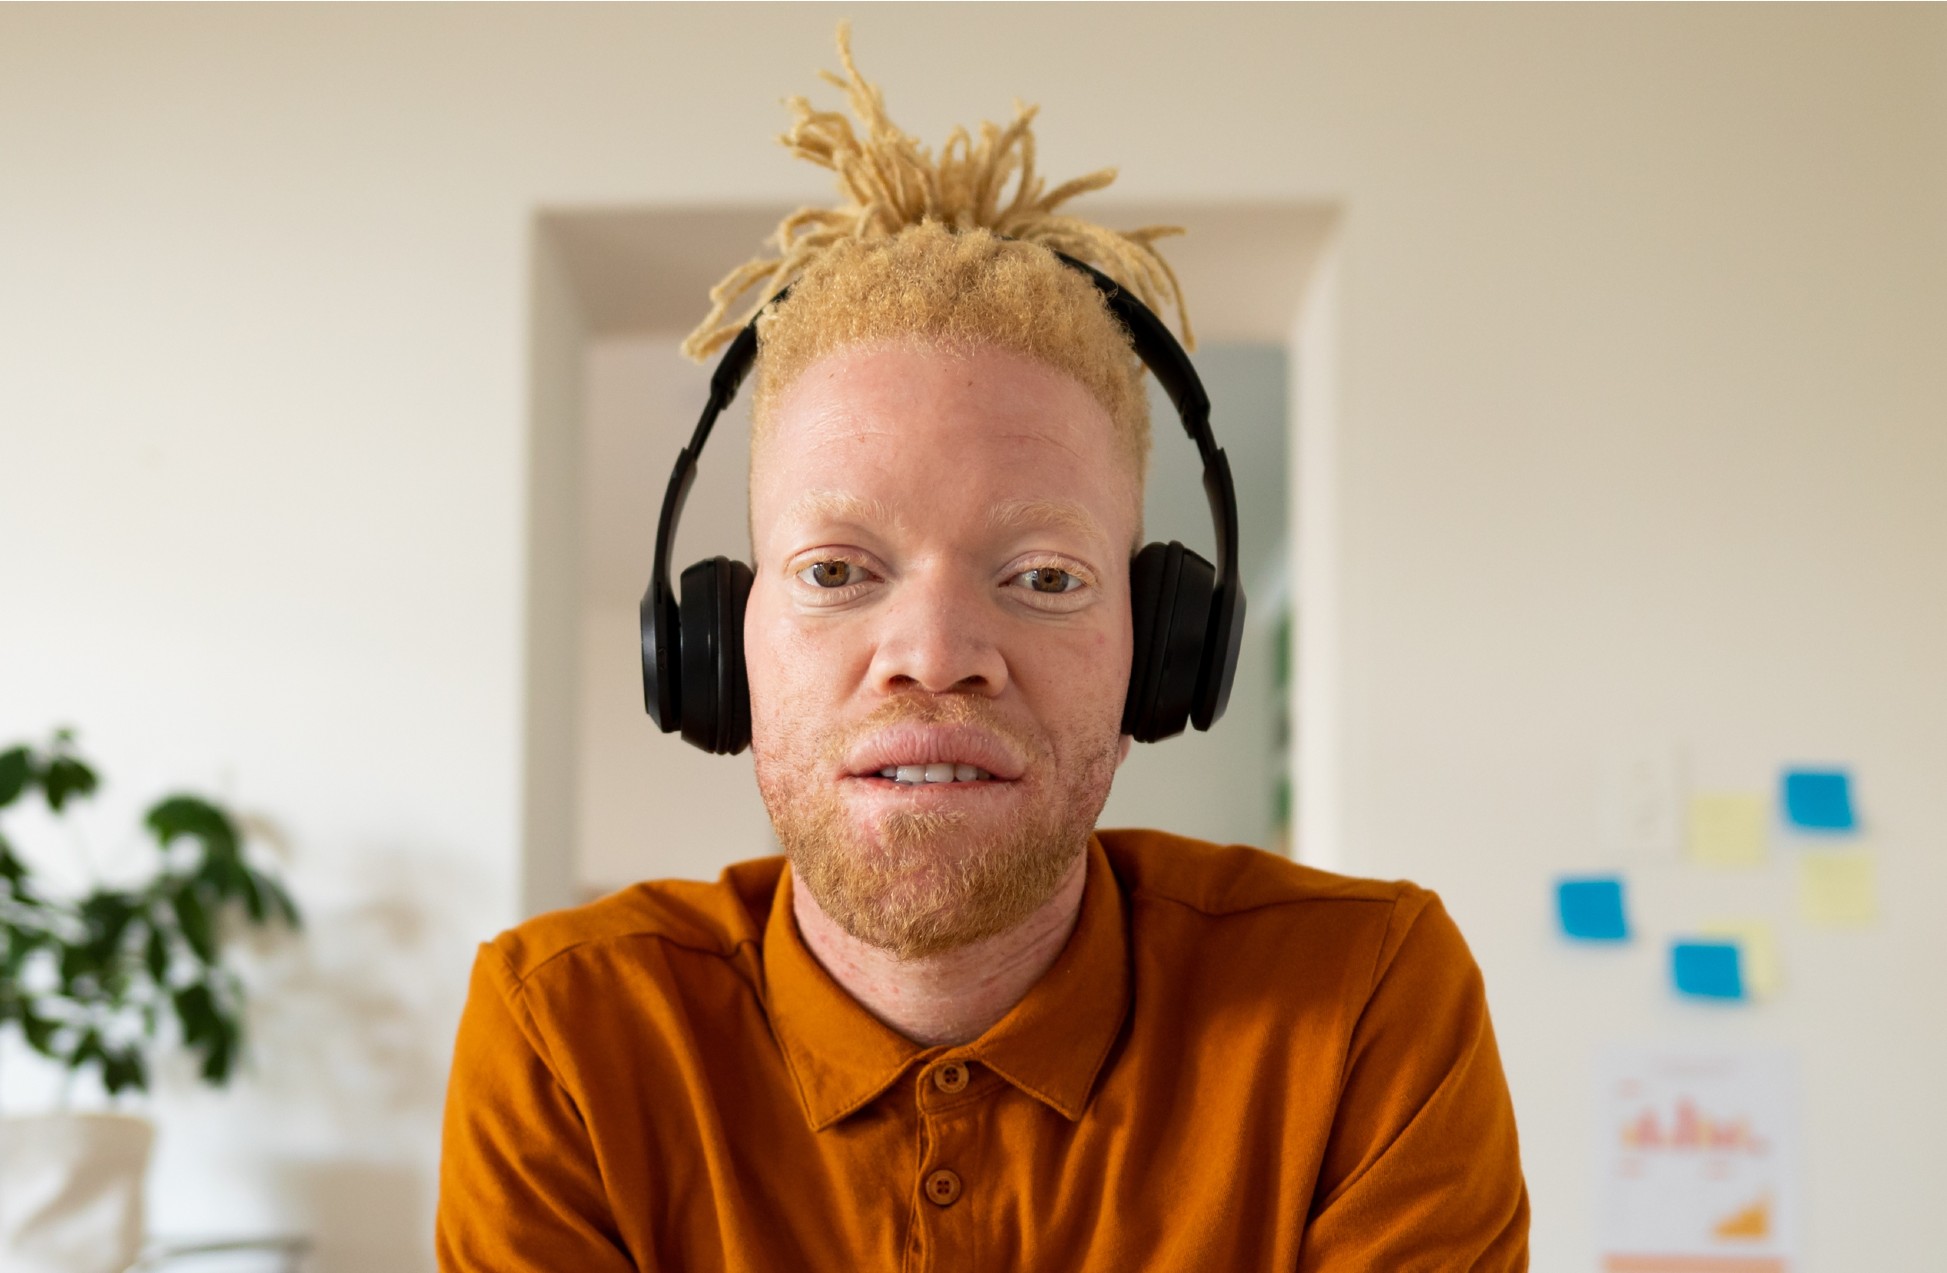 Young man with Albinism wearing a headset